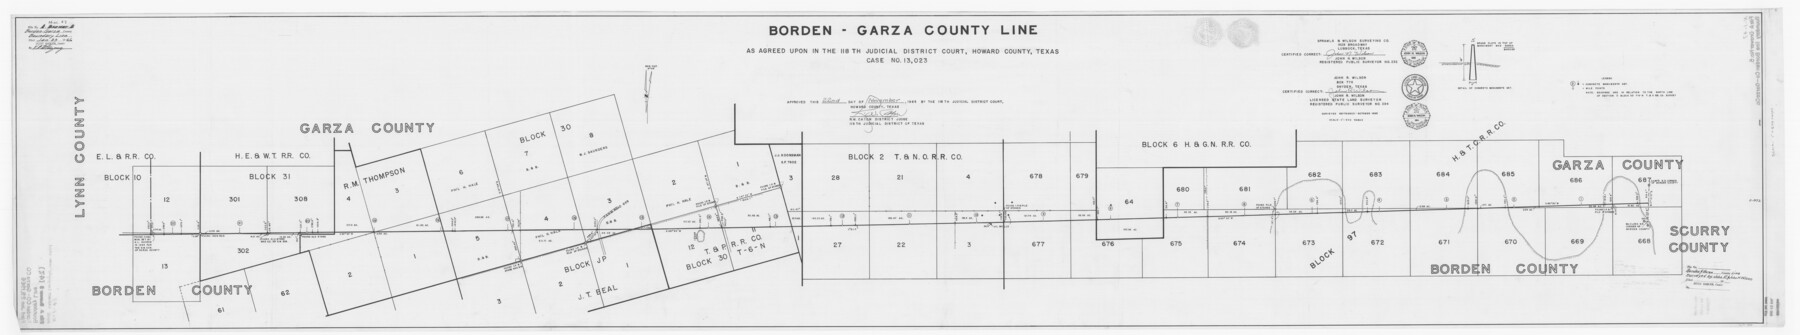 1697, Borden - Garza County Line as agreed upon in the 118th Judicial District Court, Howard County, Texas Case No. 13,023, General Map Collection